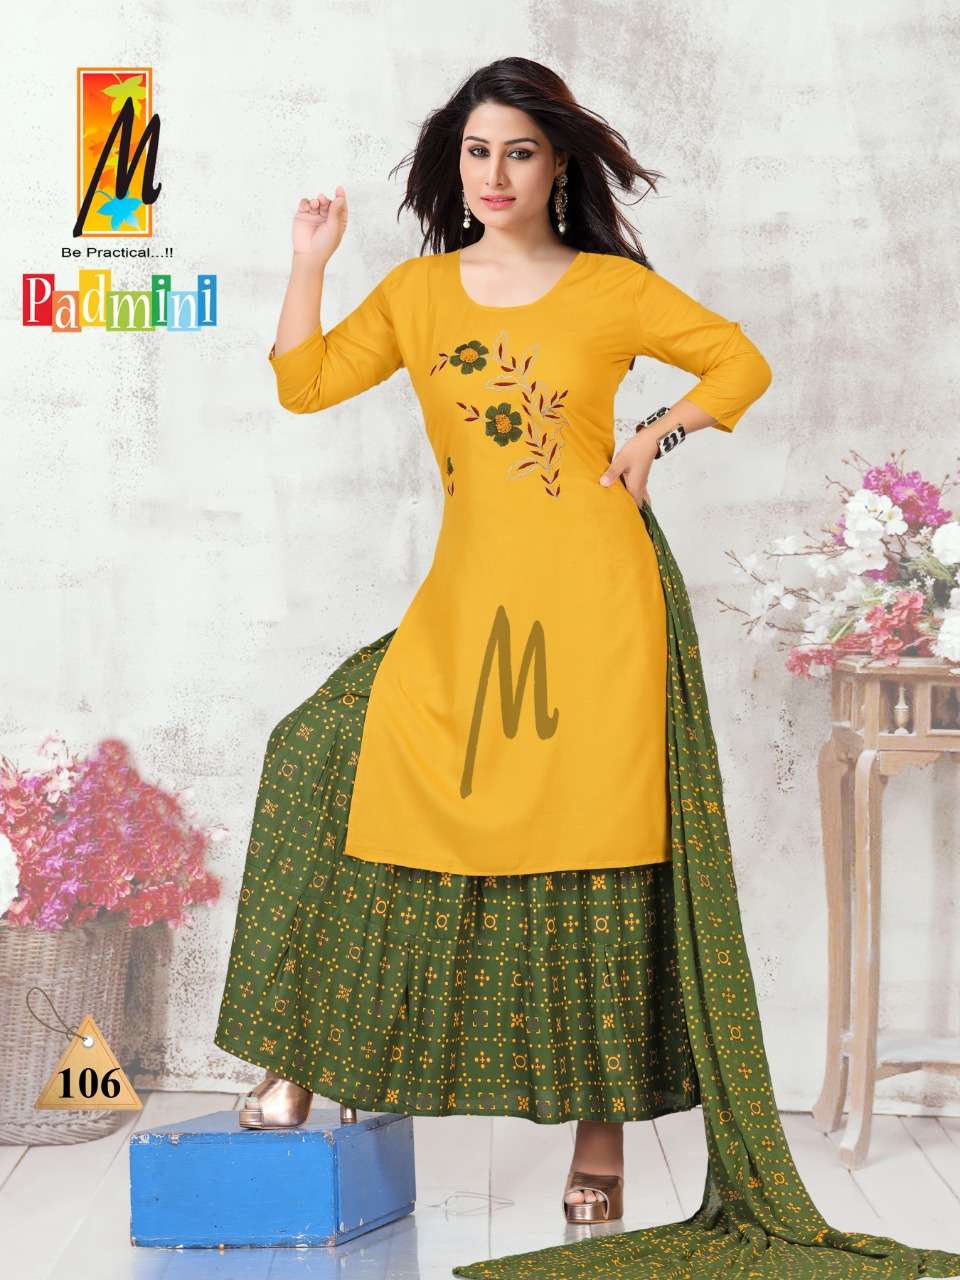 PADMINI BY M BE PRACTICAL 101 TO 108 SERIES BEAUTIFUL STYLISH PATIYALA SUITS FANCY COLORFUL CASUAL WEAR & ETHNIC WEAR & READY TO WEAR RAYON WITH WORK DRESSES AT WHOLESALE PRICE